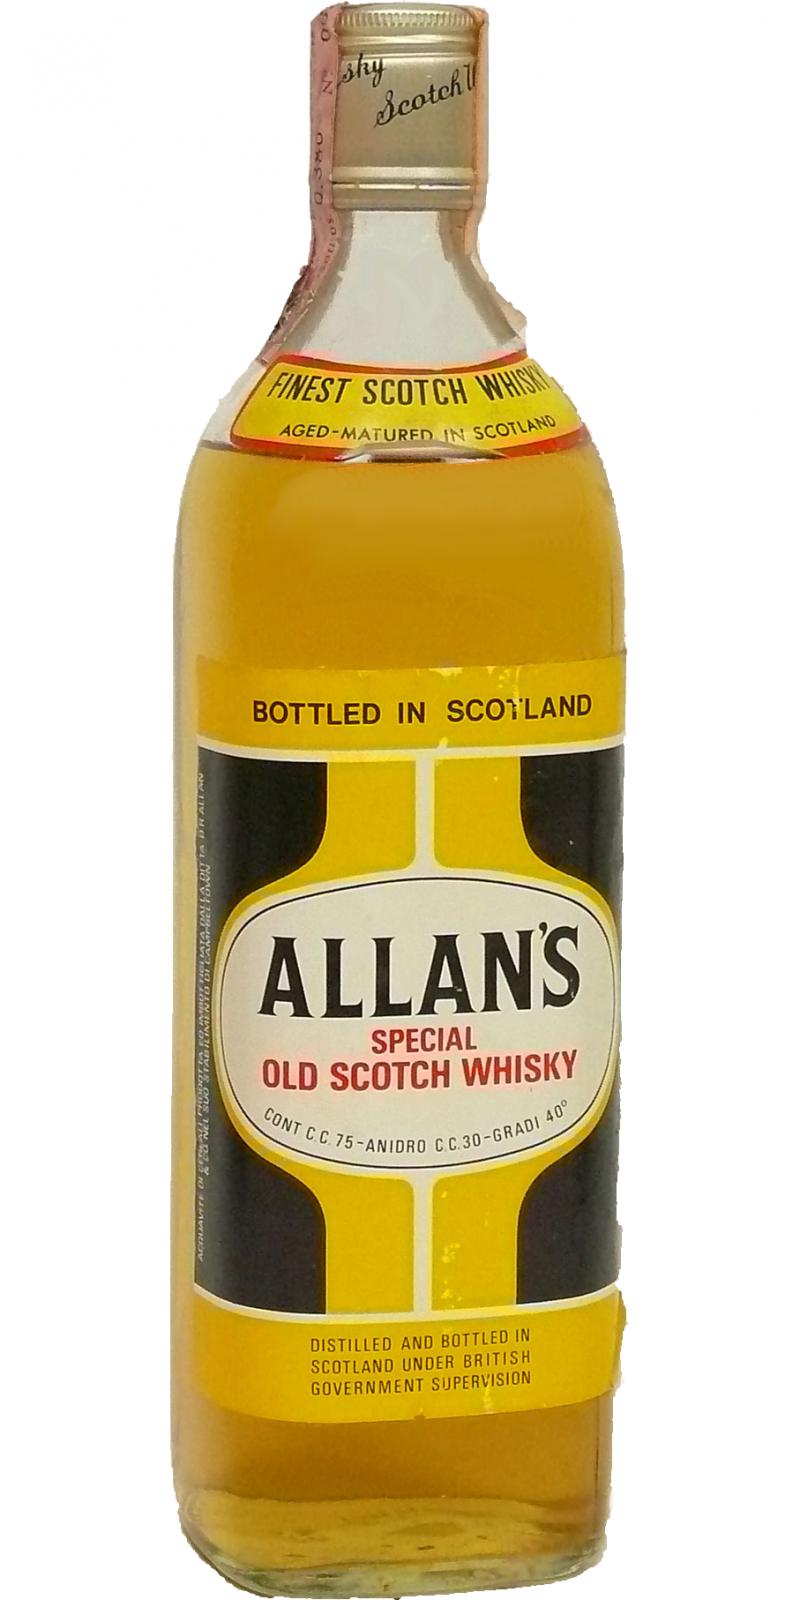 Allan's Special Old Scotch Whisky